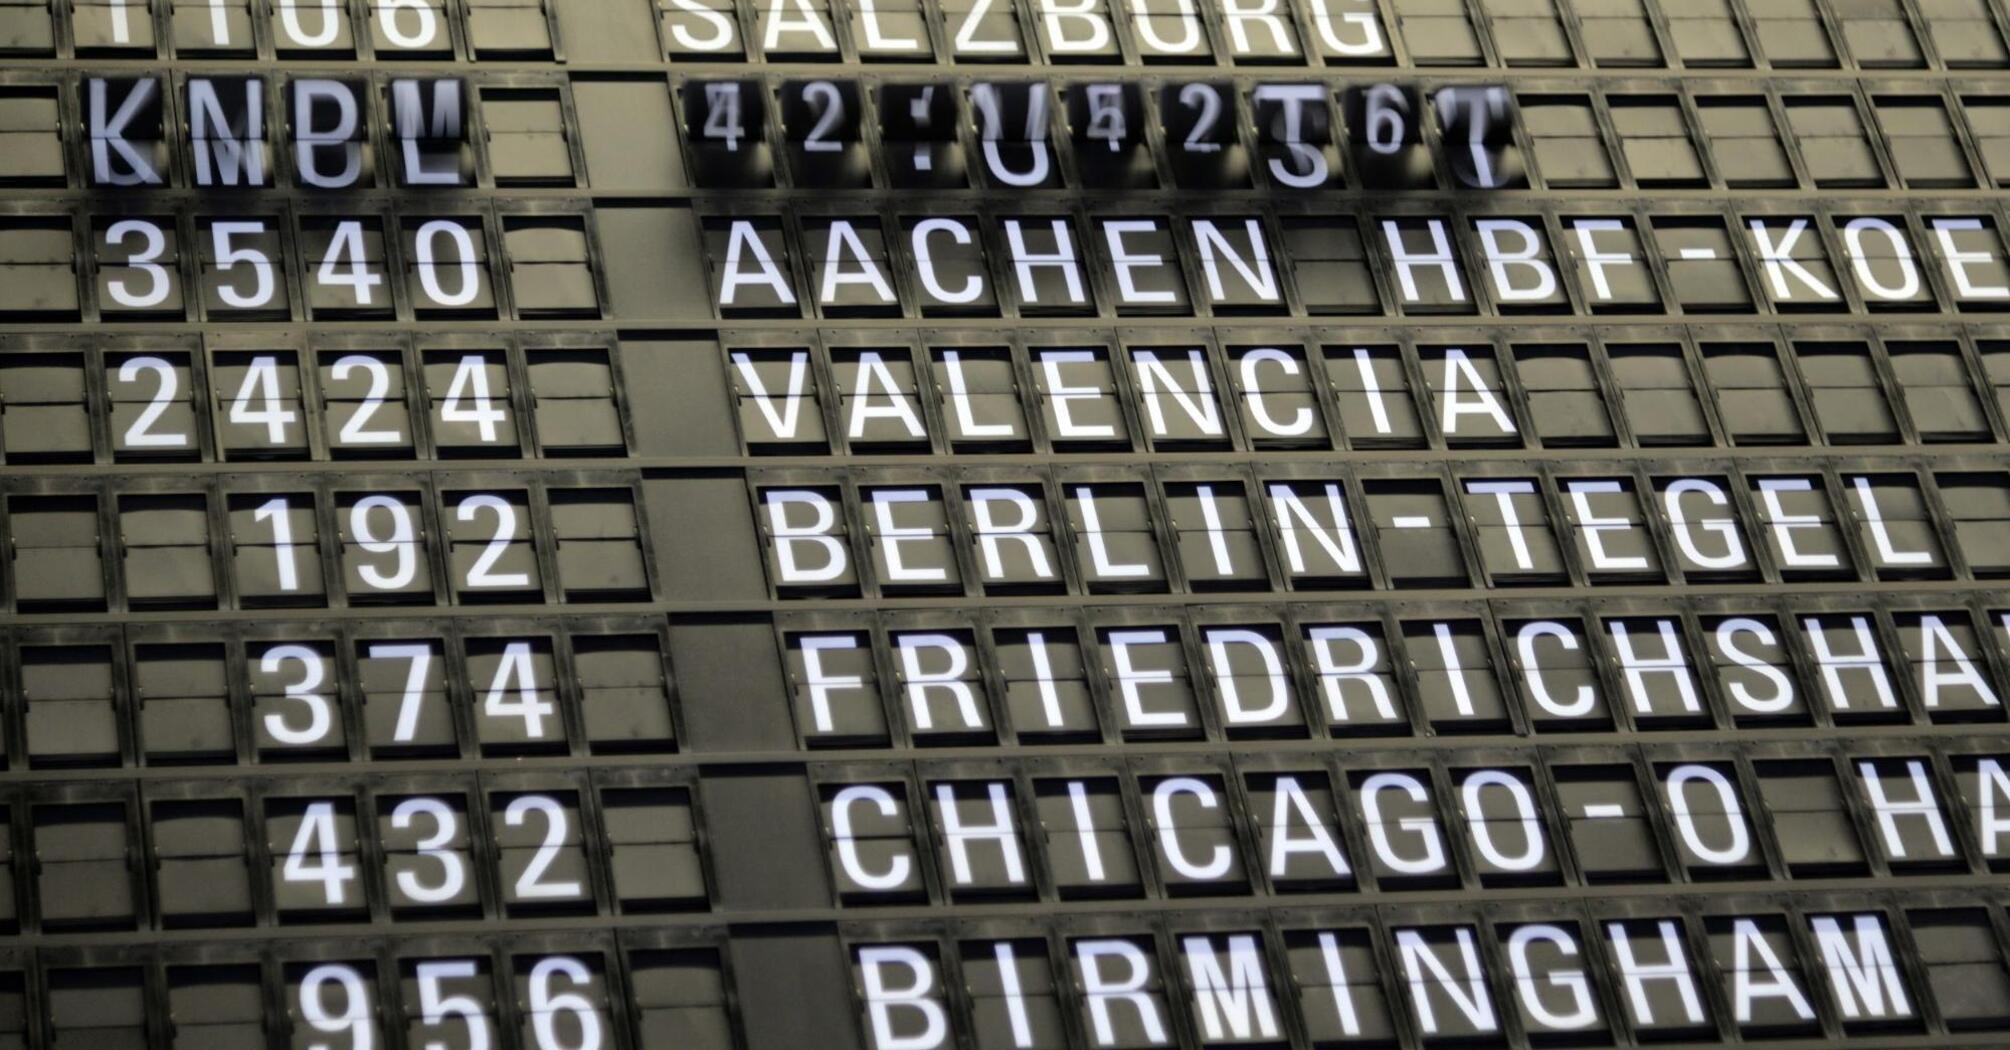 Electronic train schedule board at a European station